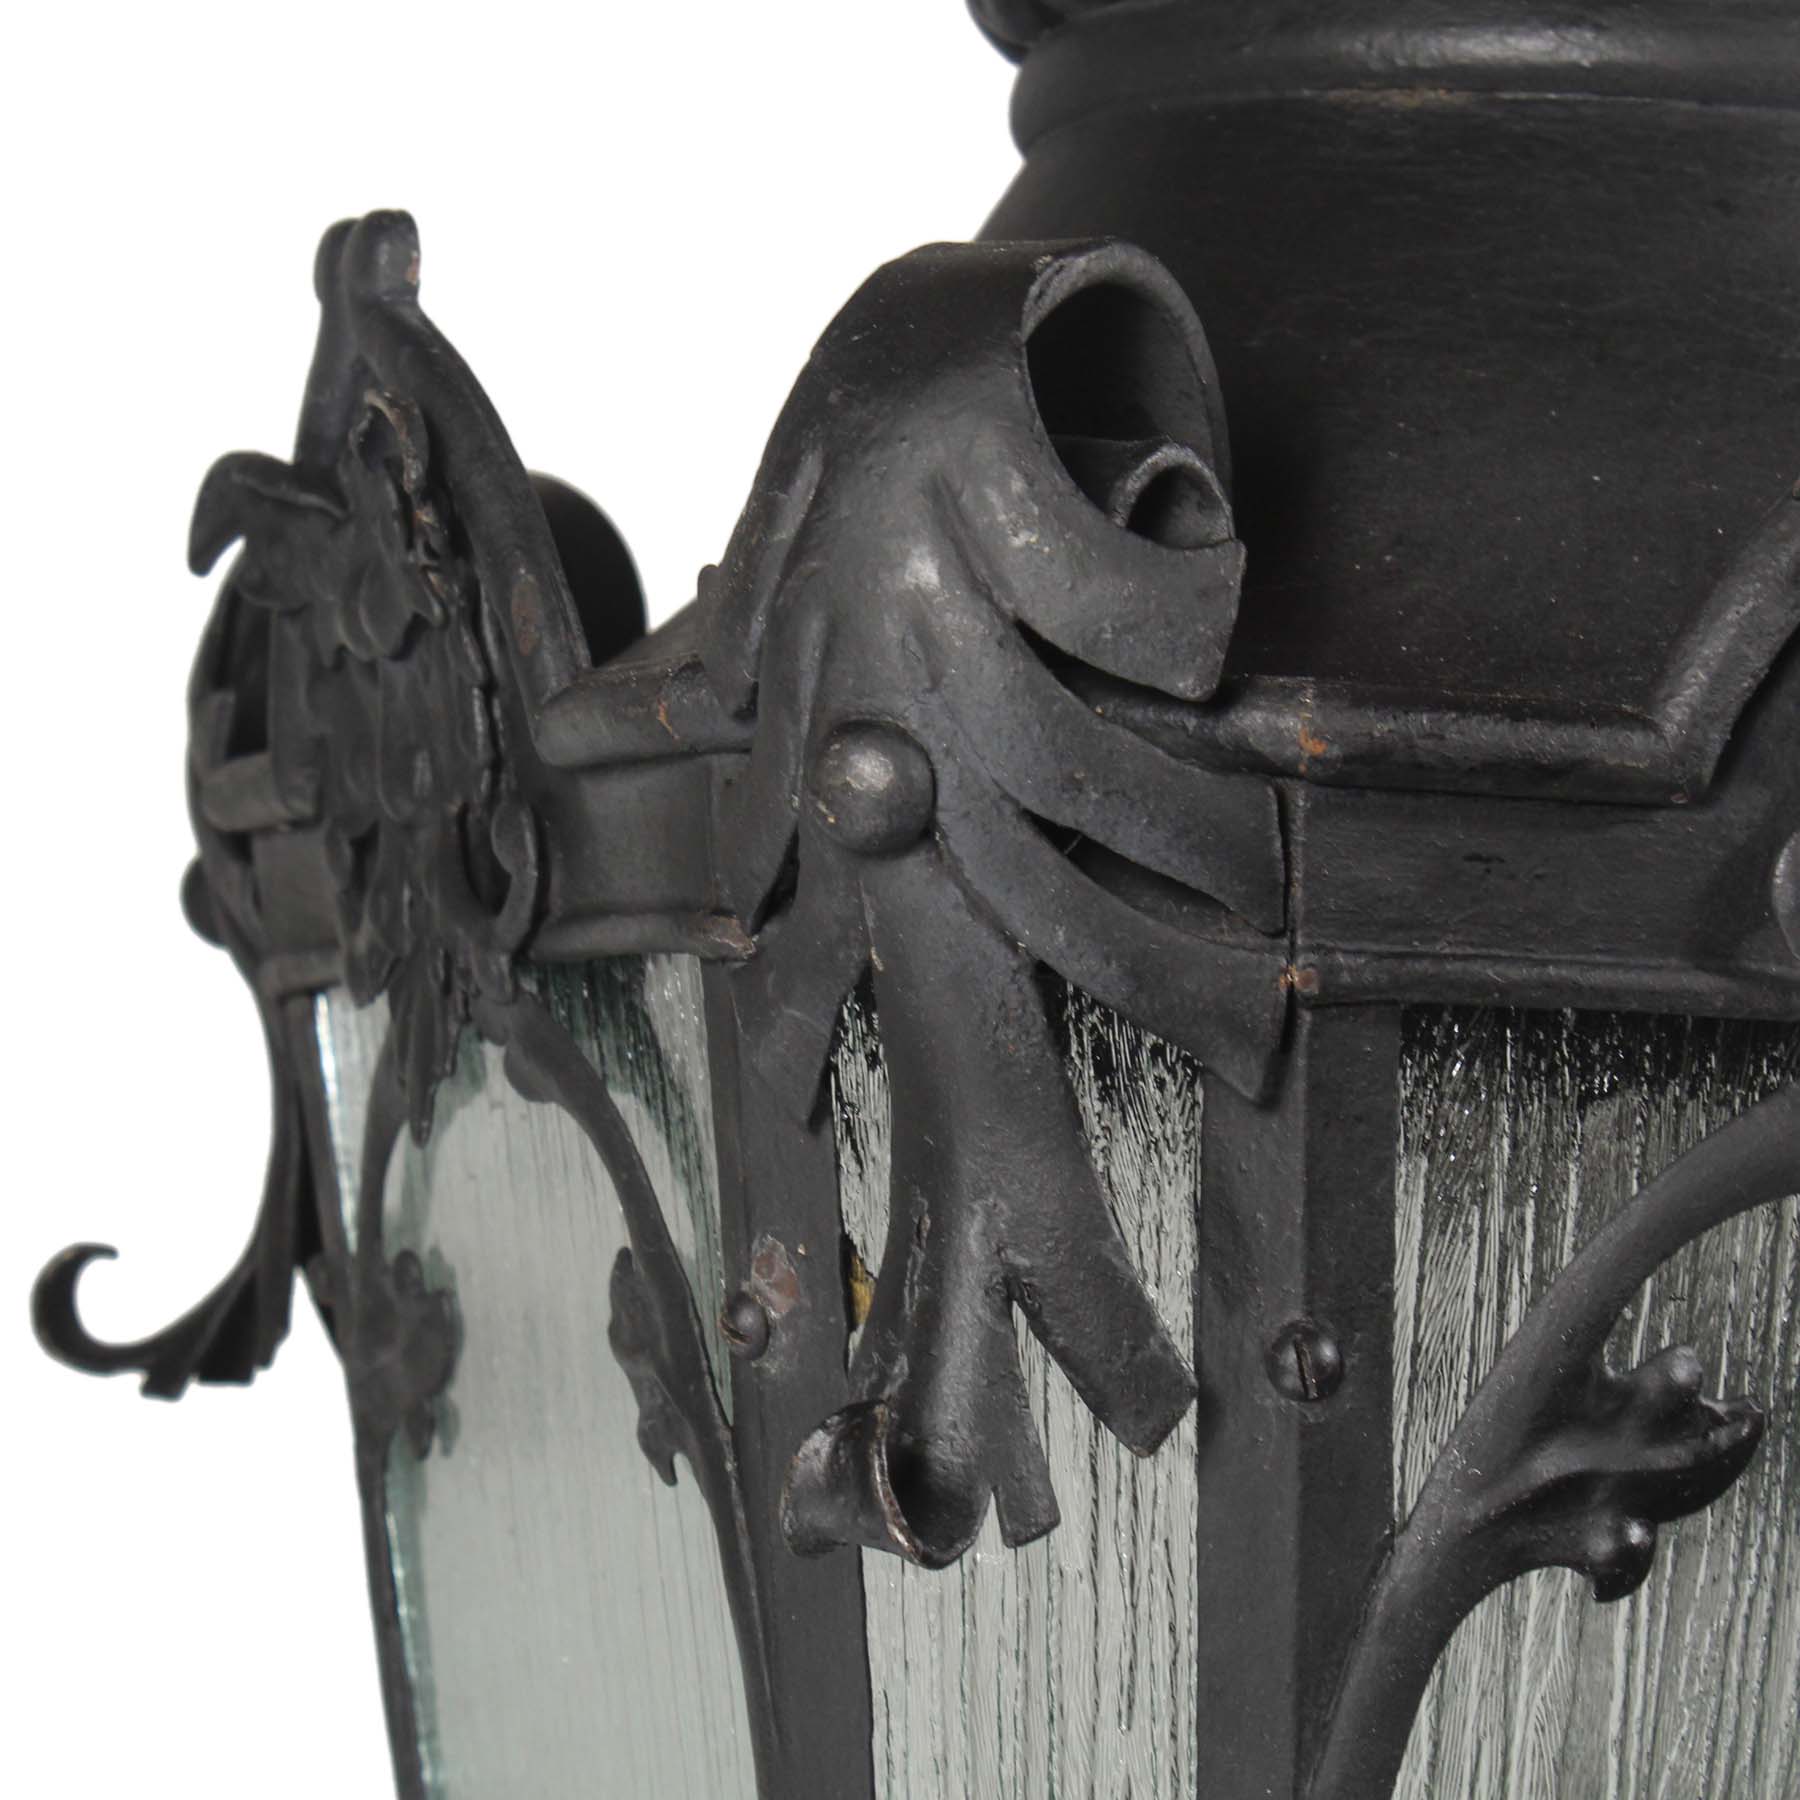 SOLD Antique Hand Riveted Figural Iron Lantern, c. 1880 -67844